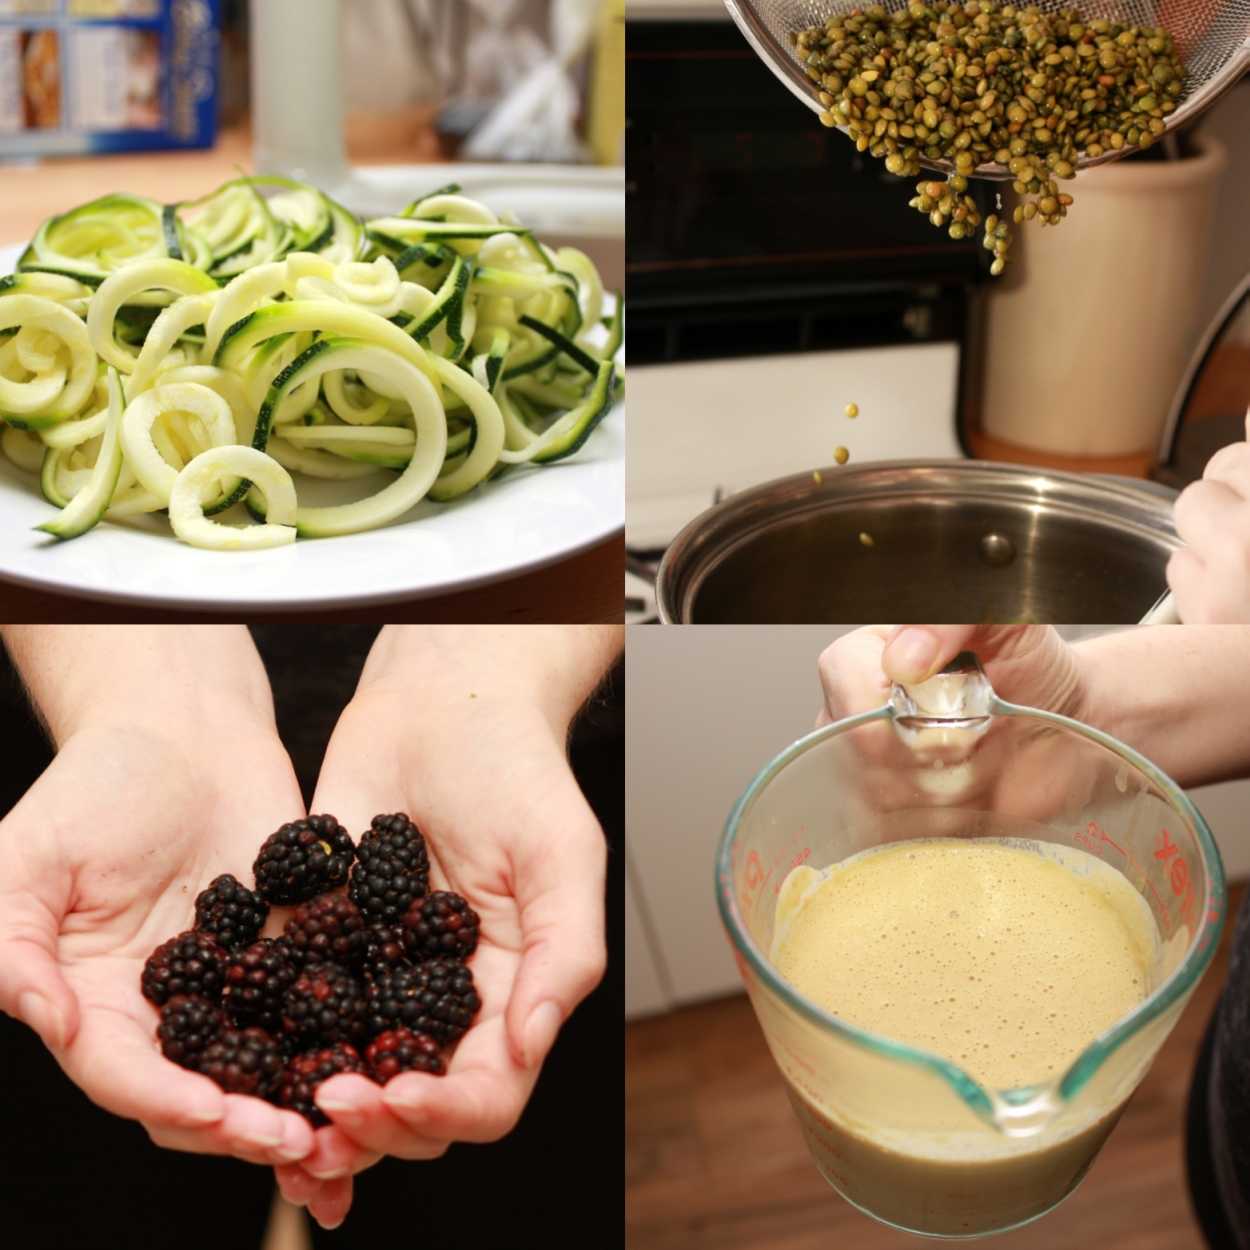 Four images of dishes in the Goop cleanse